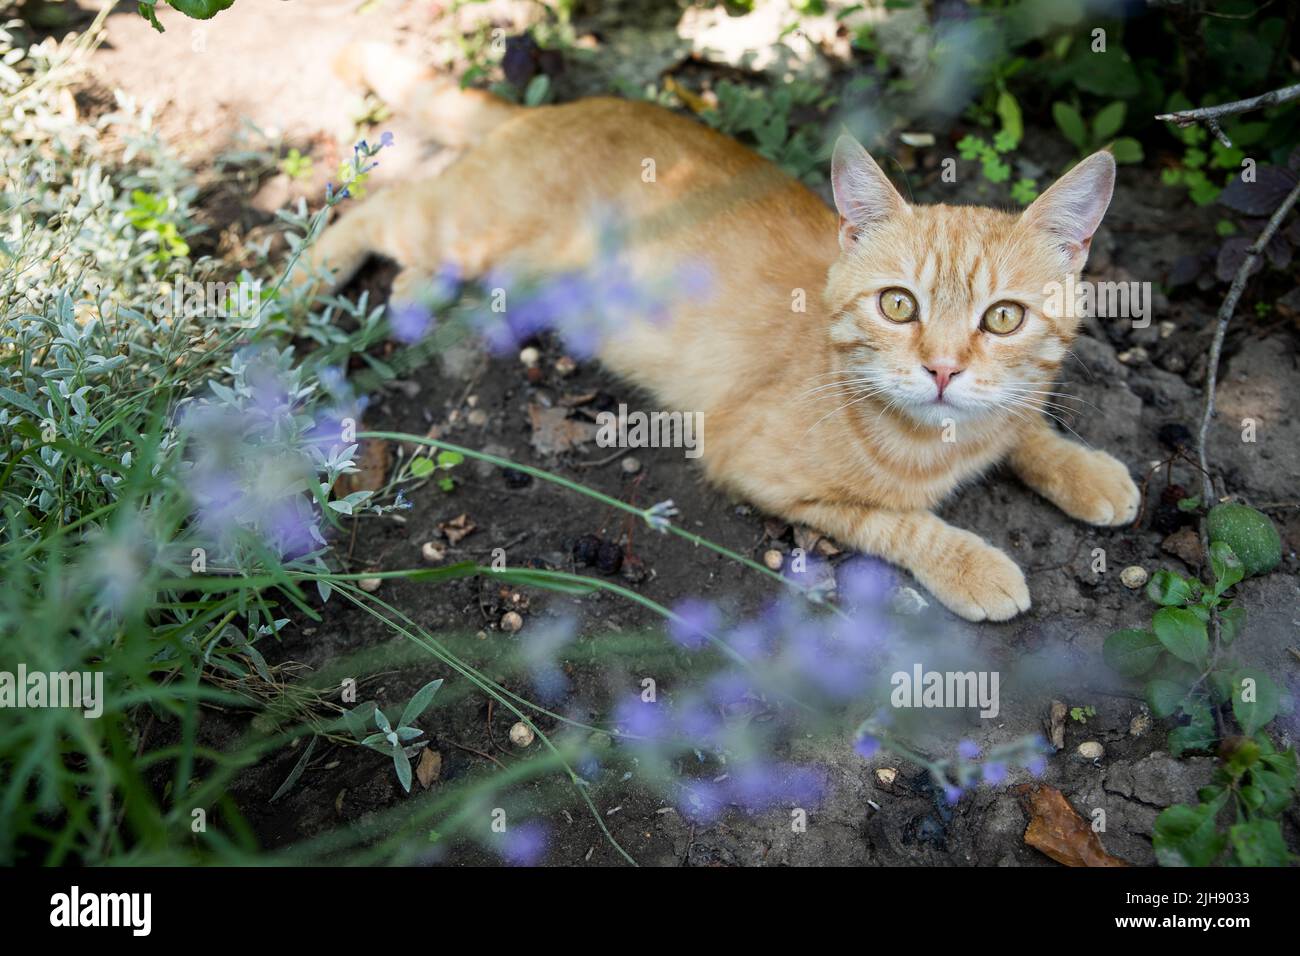 Red cat is resting in the garden. Among beautiful plants. Happy pet life concept. Stock Photo